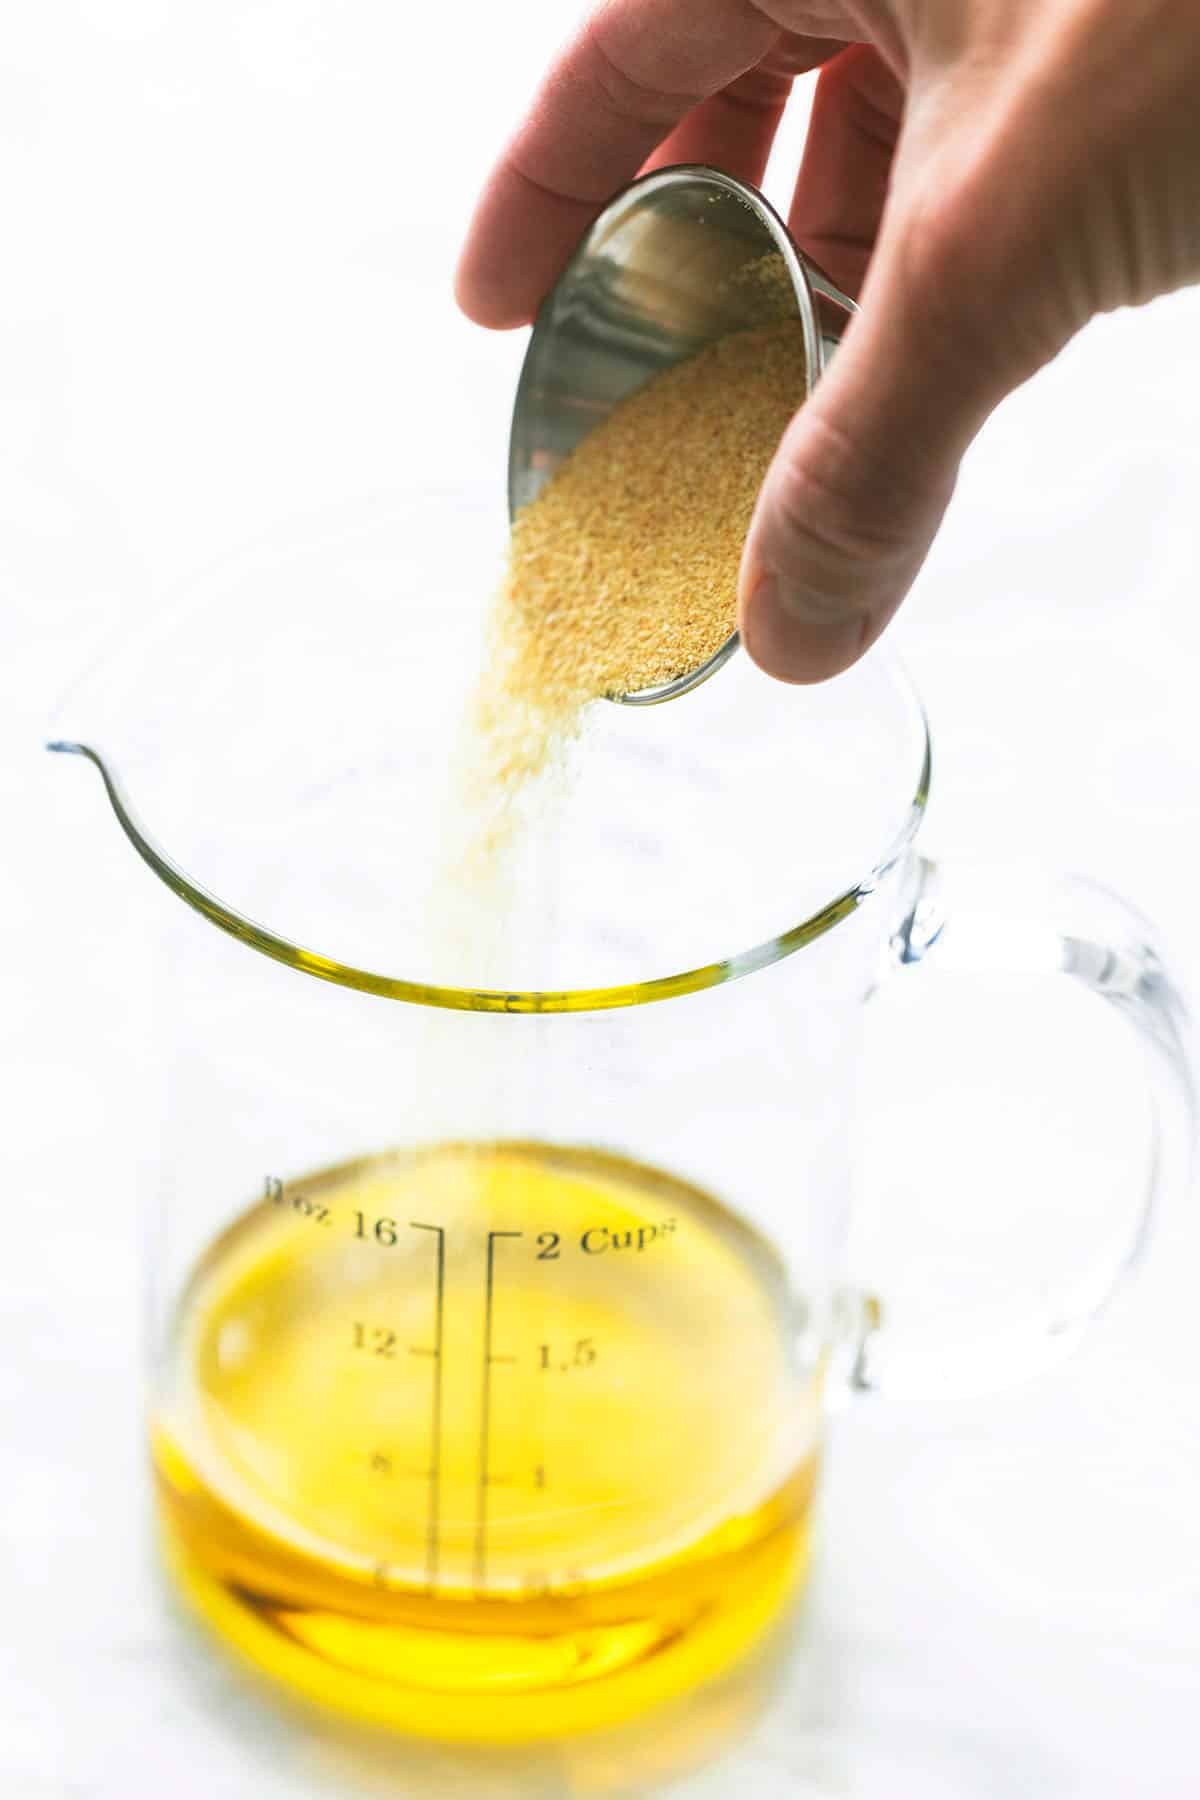 hand pouring garlic powder into glass measuring cup of olive oil